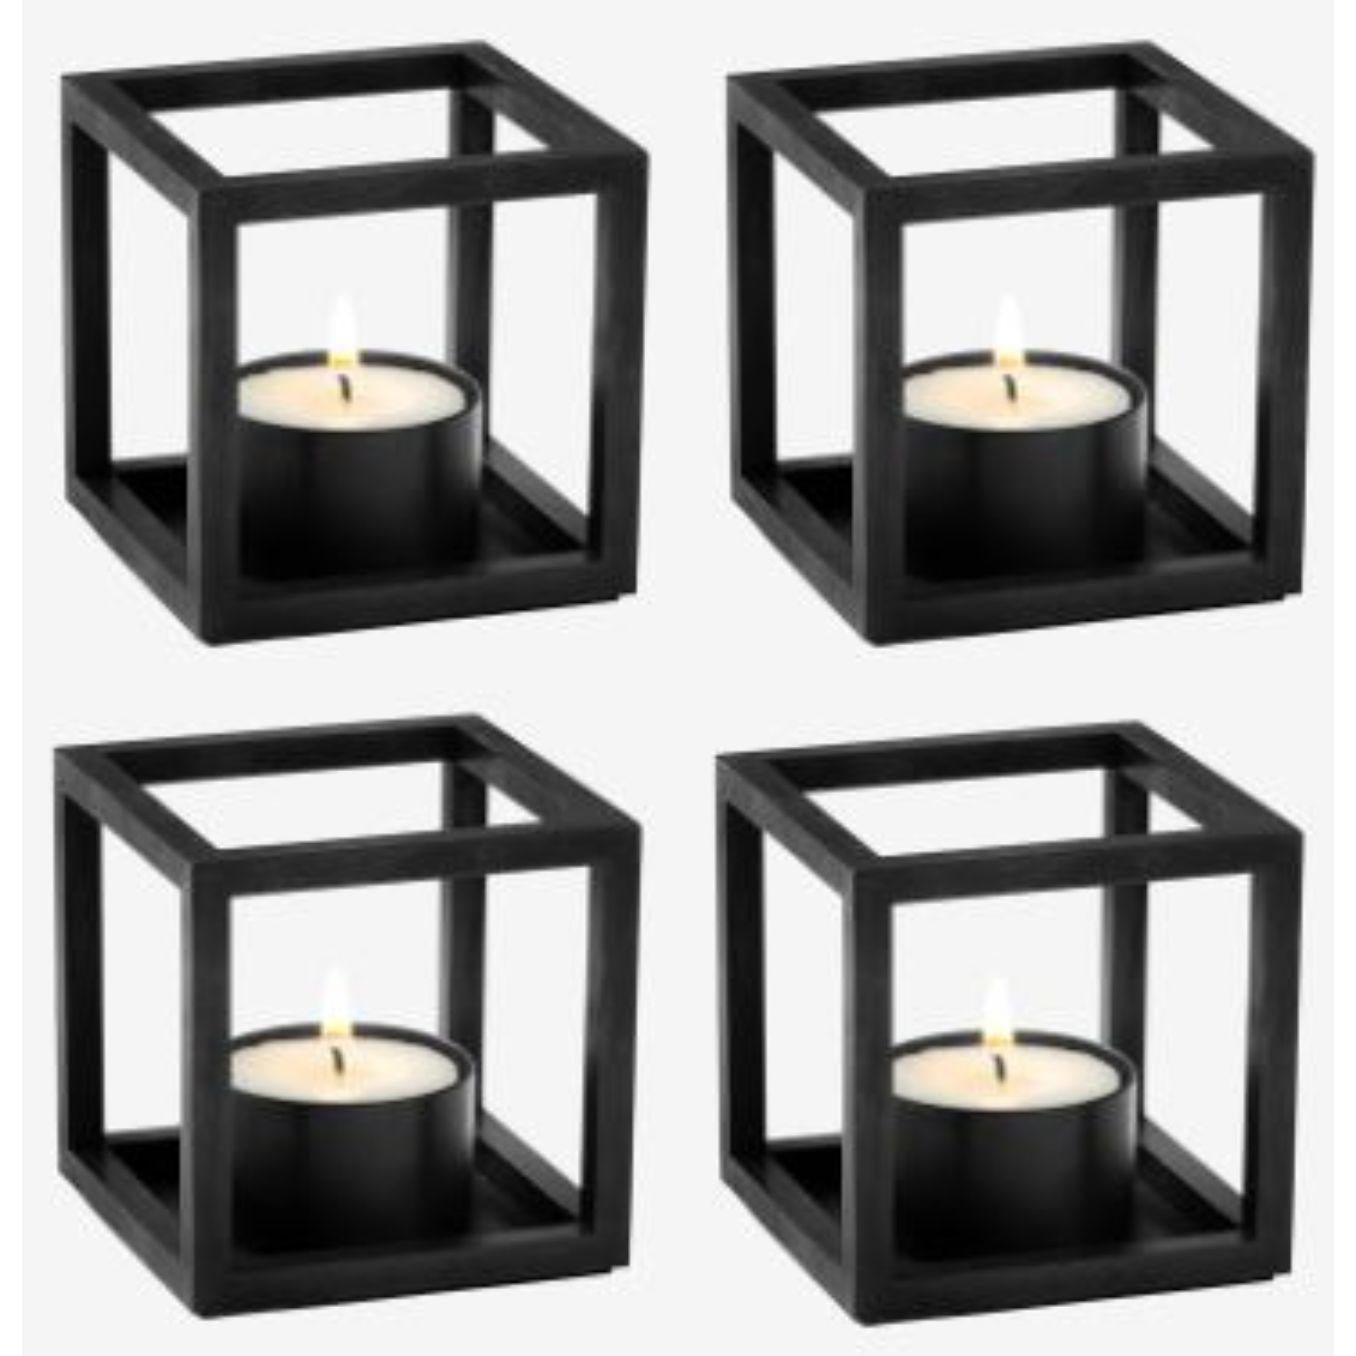 Set of 4 black kubus T candle holders by Lassen
Dimensions: D 7 x W 7 x H 7 cm 
Materials: Metal 
Also available in different dimensions and colors. 
Weight: 0.40 Kg

The tealight, Kubus T, is added to the Kubus collection in 2018, designed by